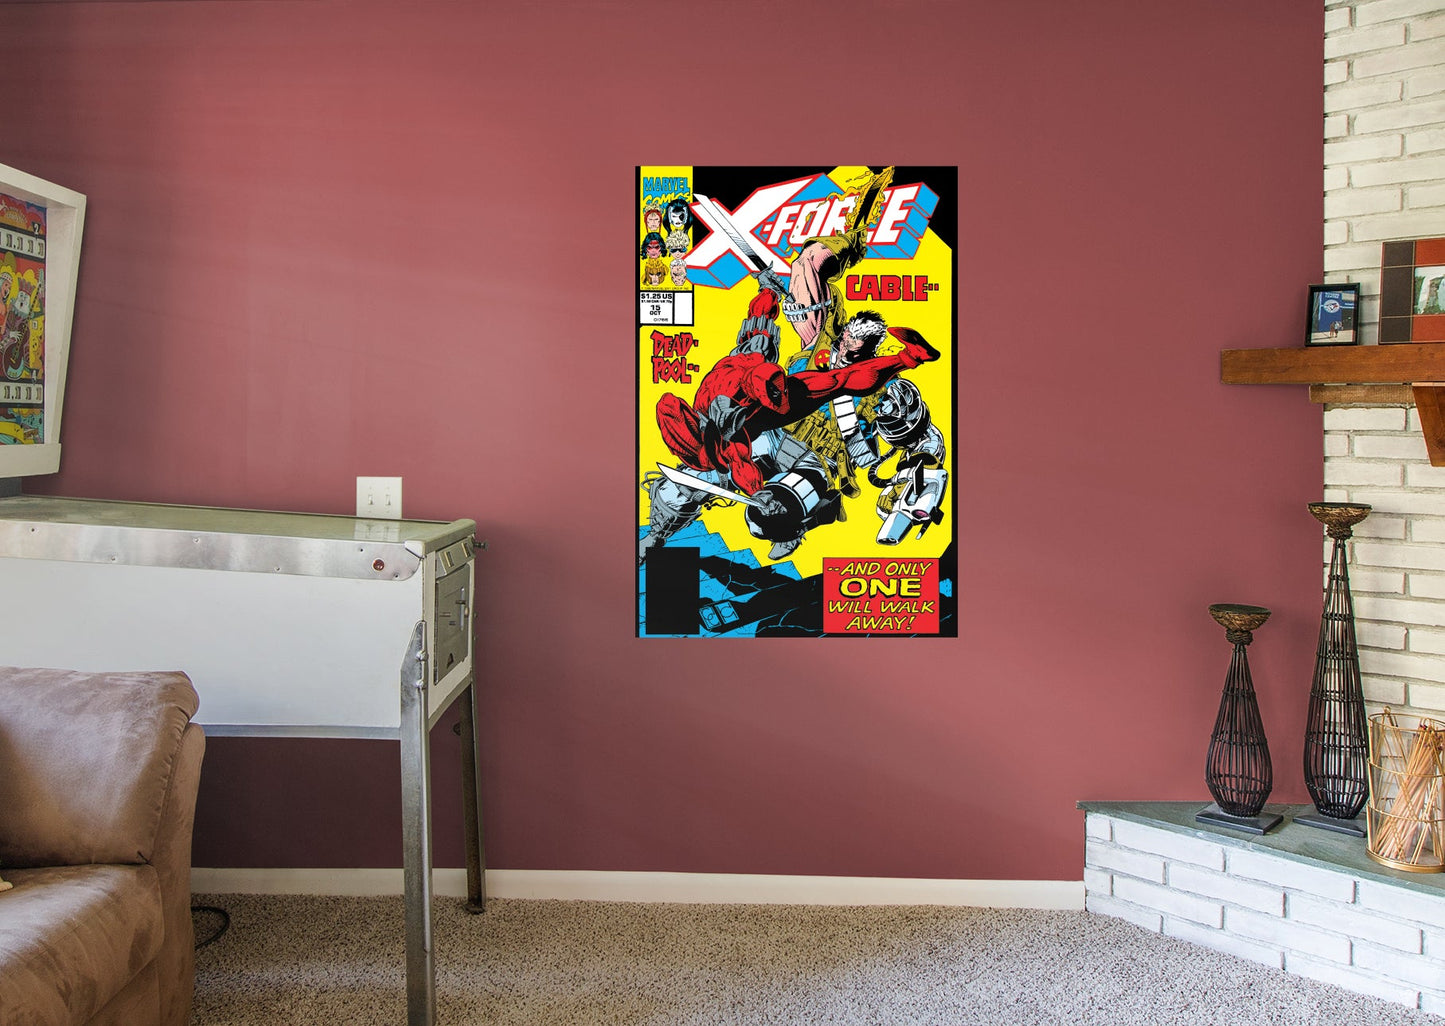 Deadpool:  Nerdy 30 X-Force #11 Cable Comic Cover Mural        - Officially Licensed Marvel Removable Wall   Adhesive Decal